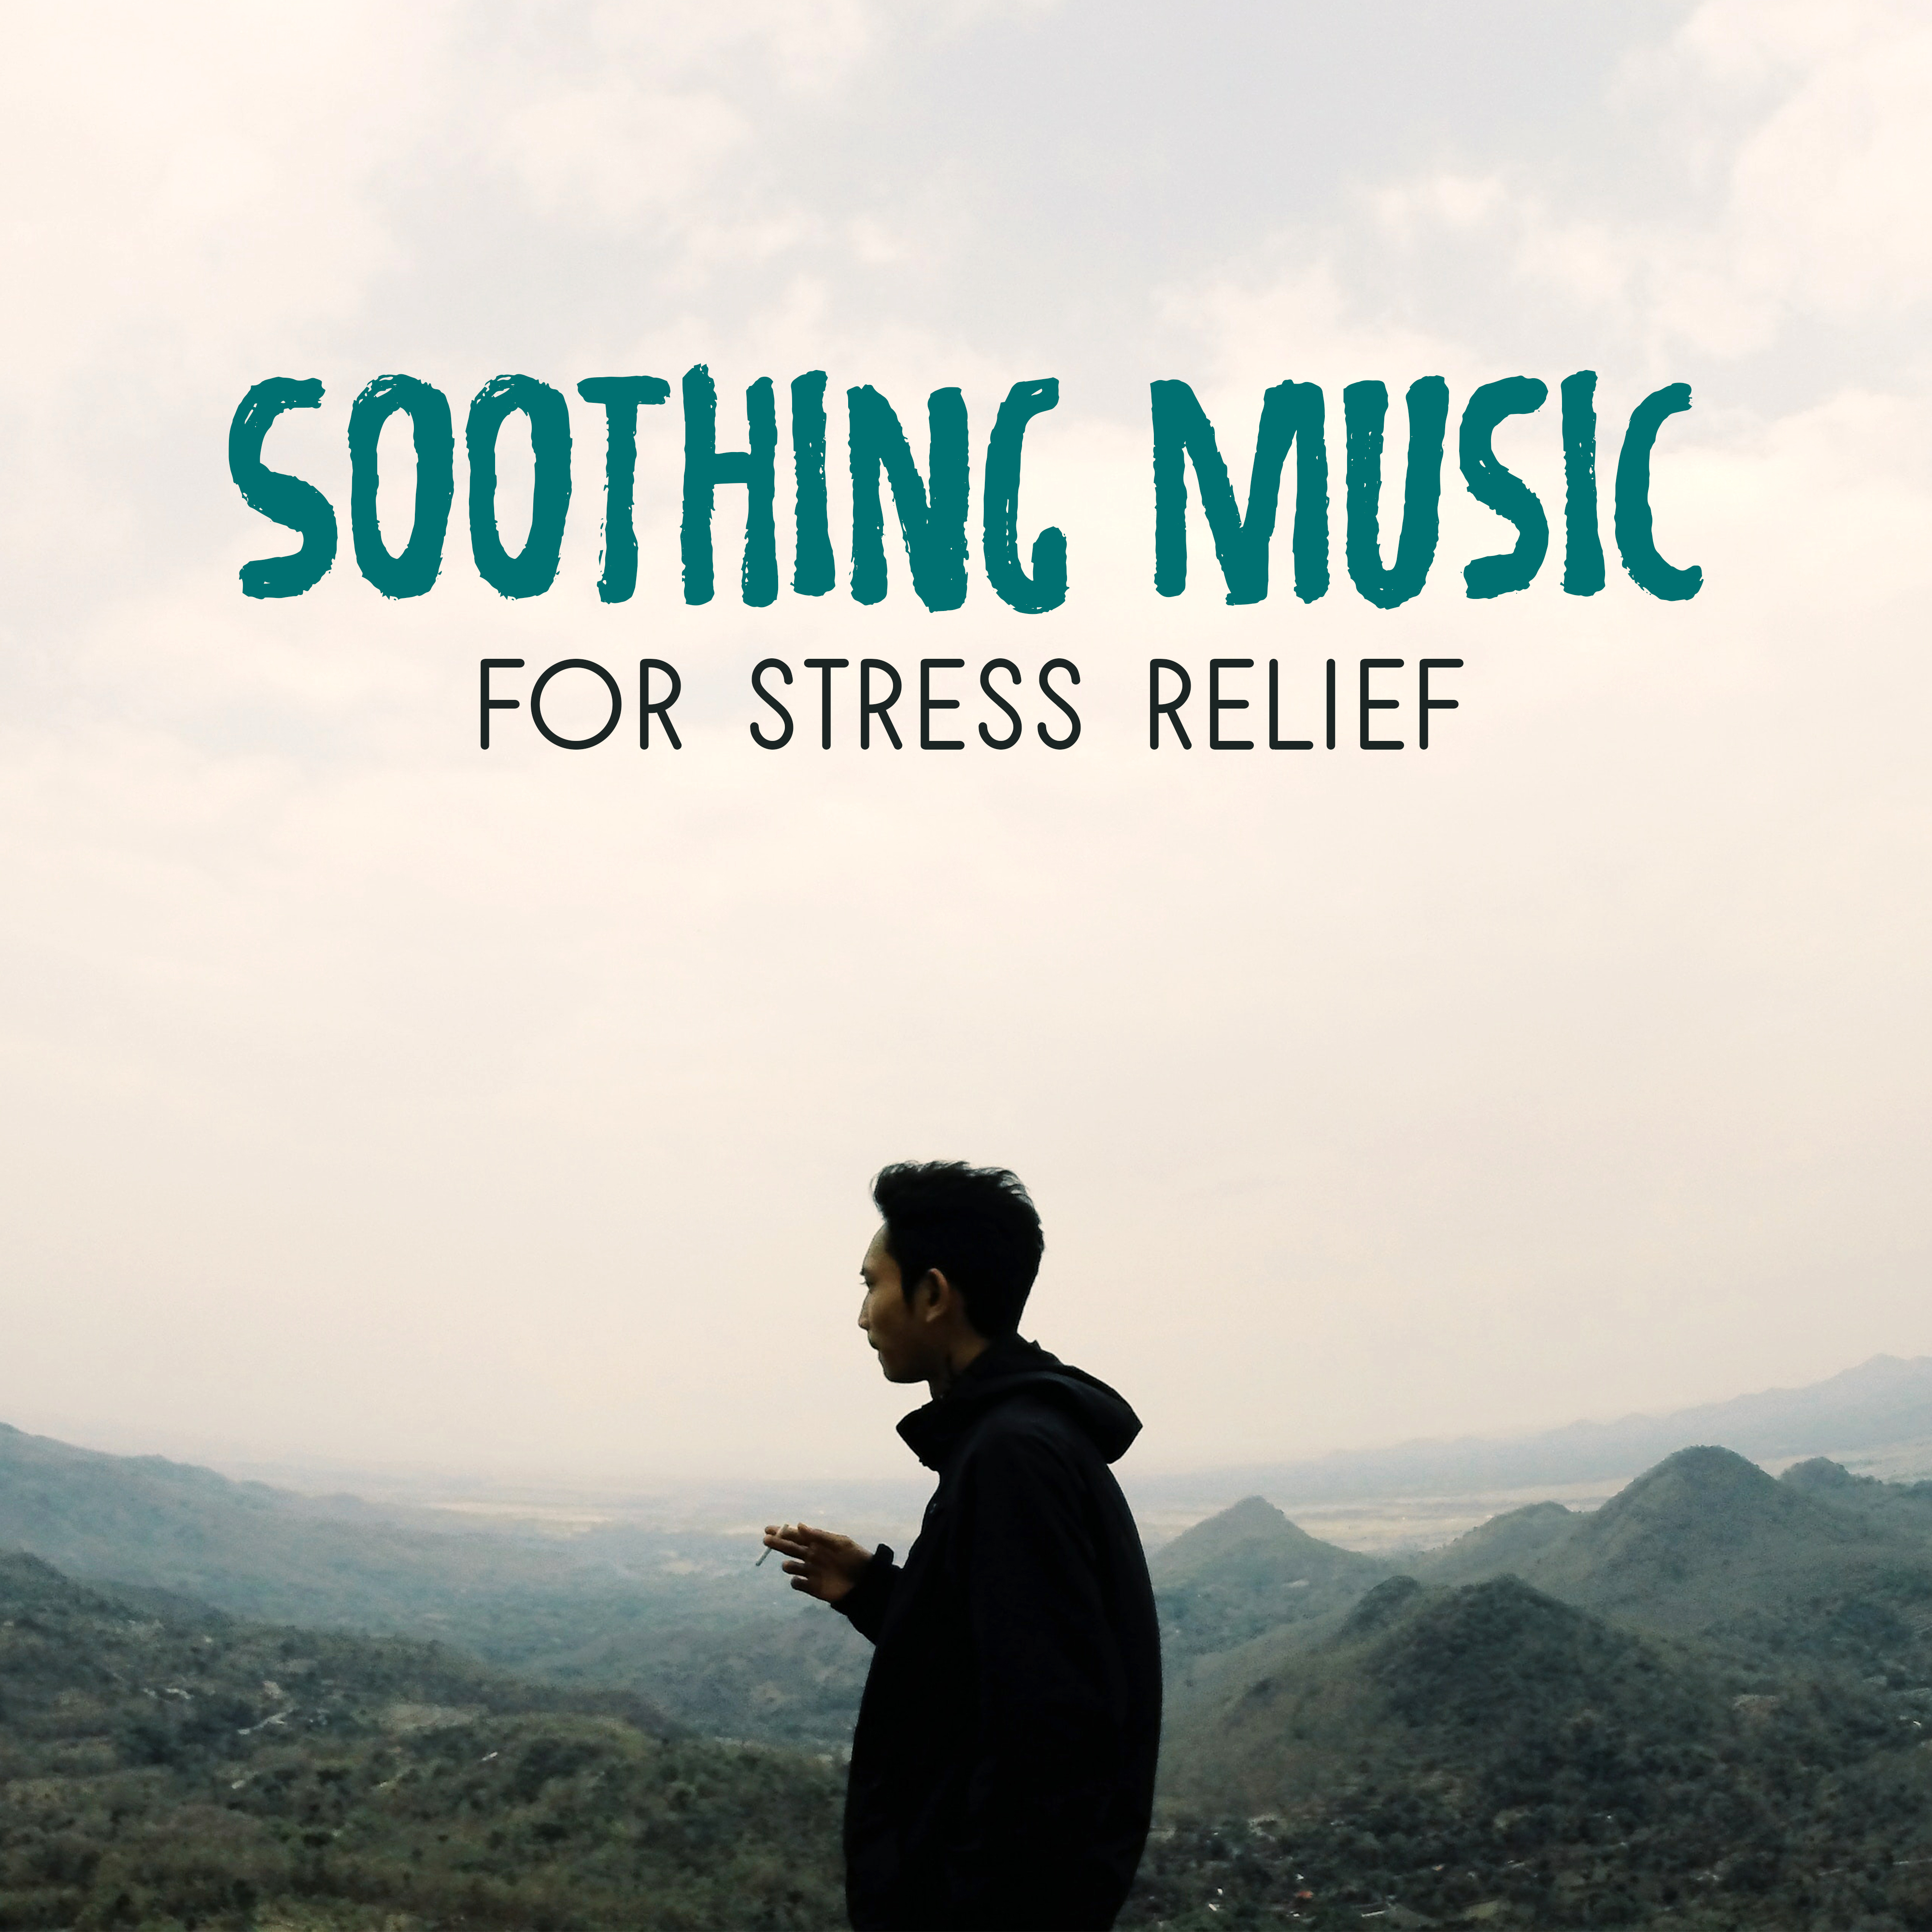 Soothing Music for Stress Relief